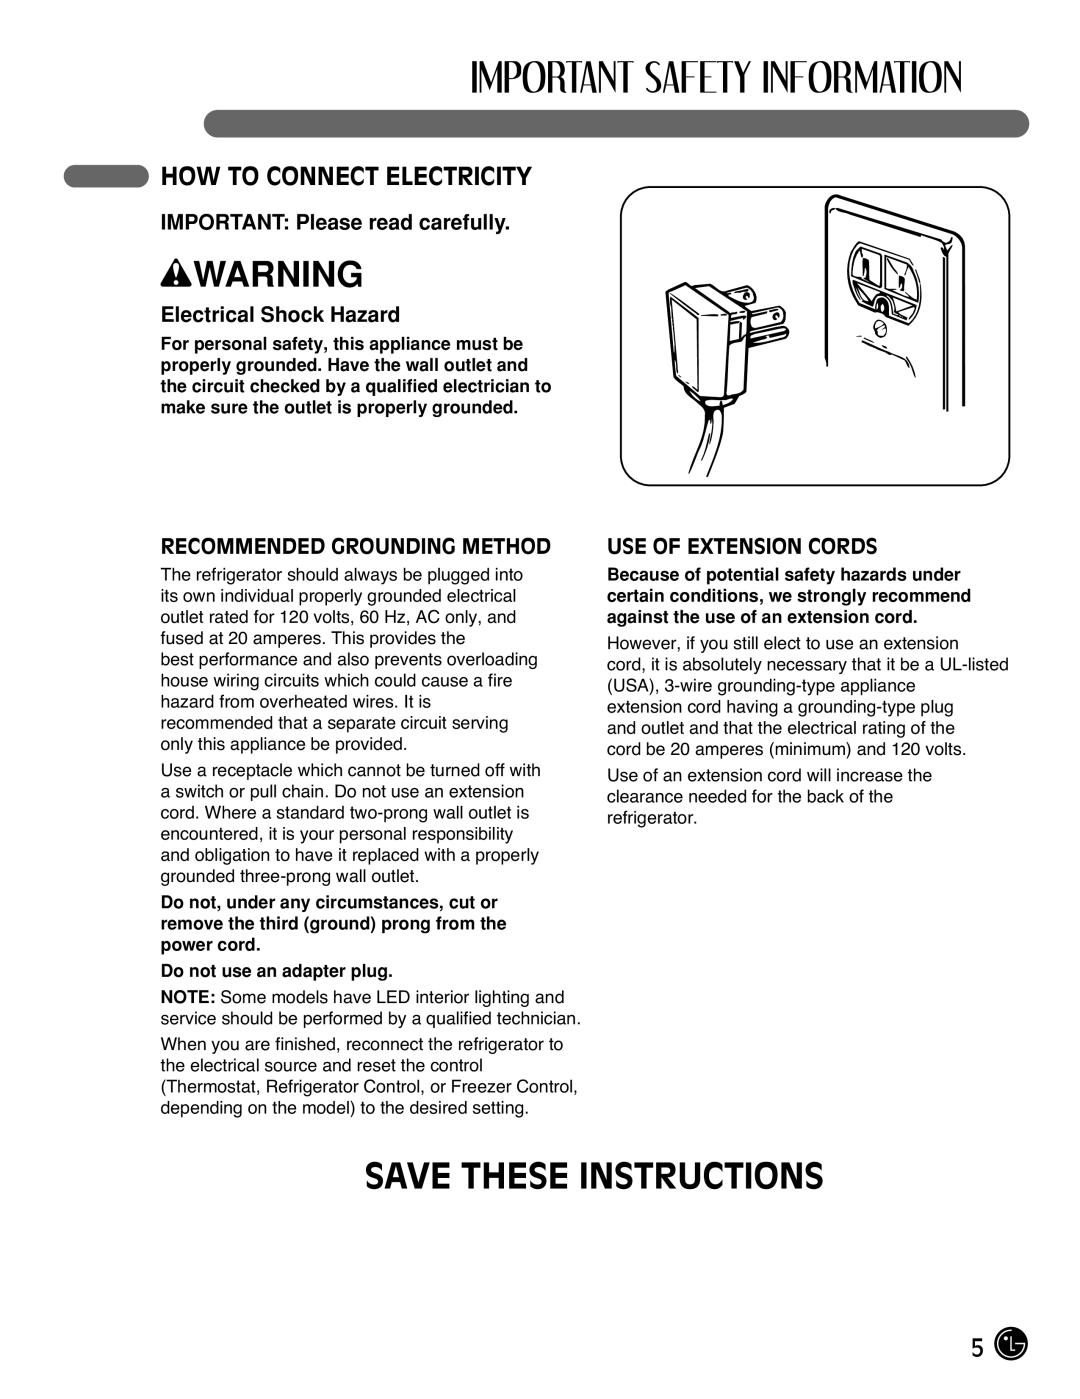 LG Electronics LFC25770 Save These Instructions, How To Connect Electricity, IMPORTANT: Please read carefully, wWARNING 